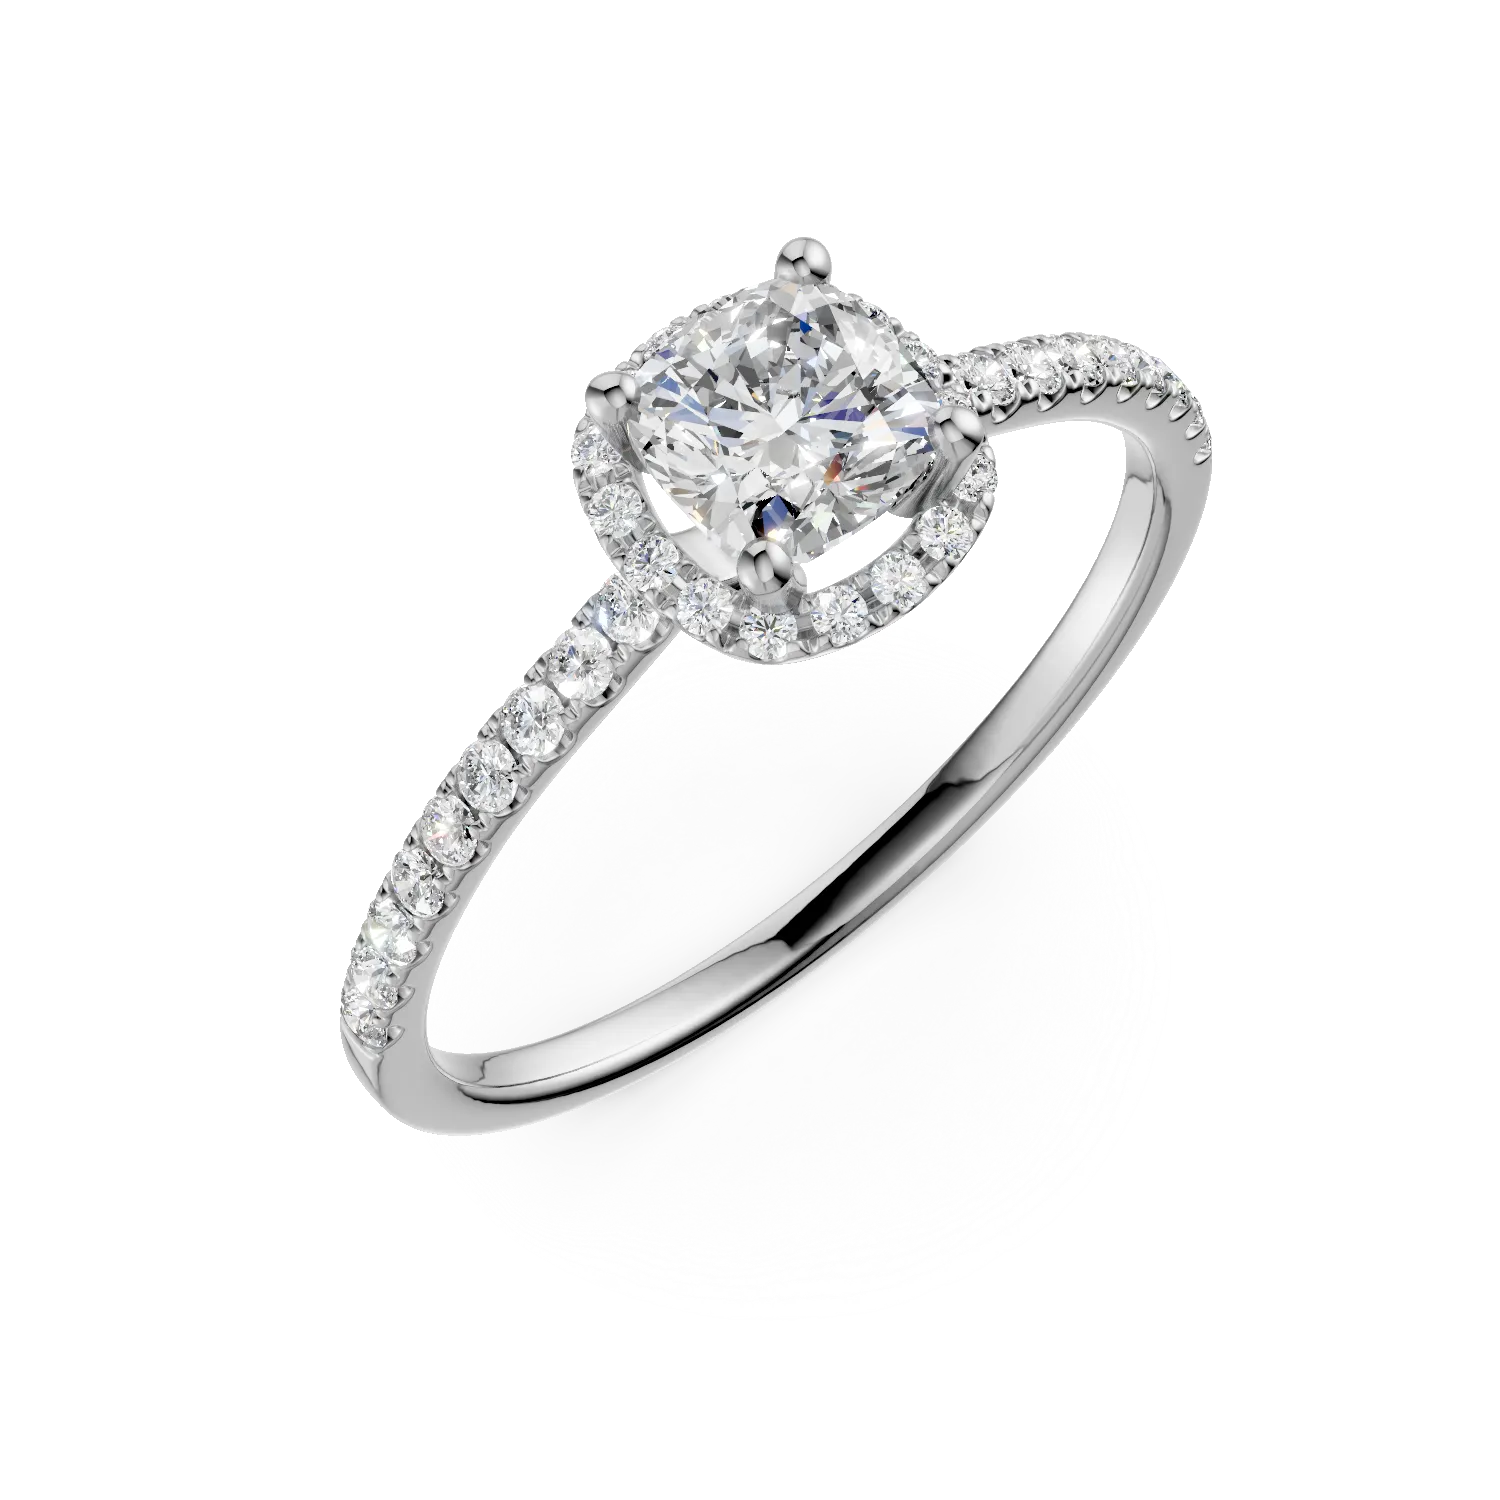 White gold engagement ring with 0.5ct diamond and 0.2ct diamonds